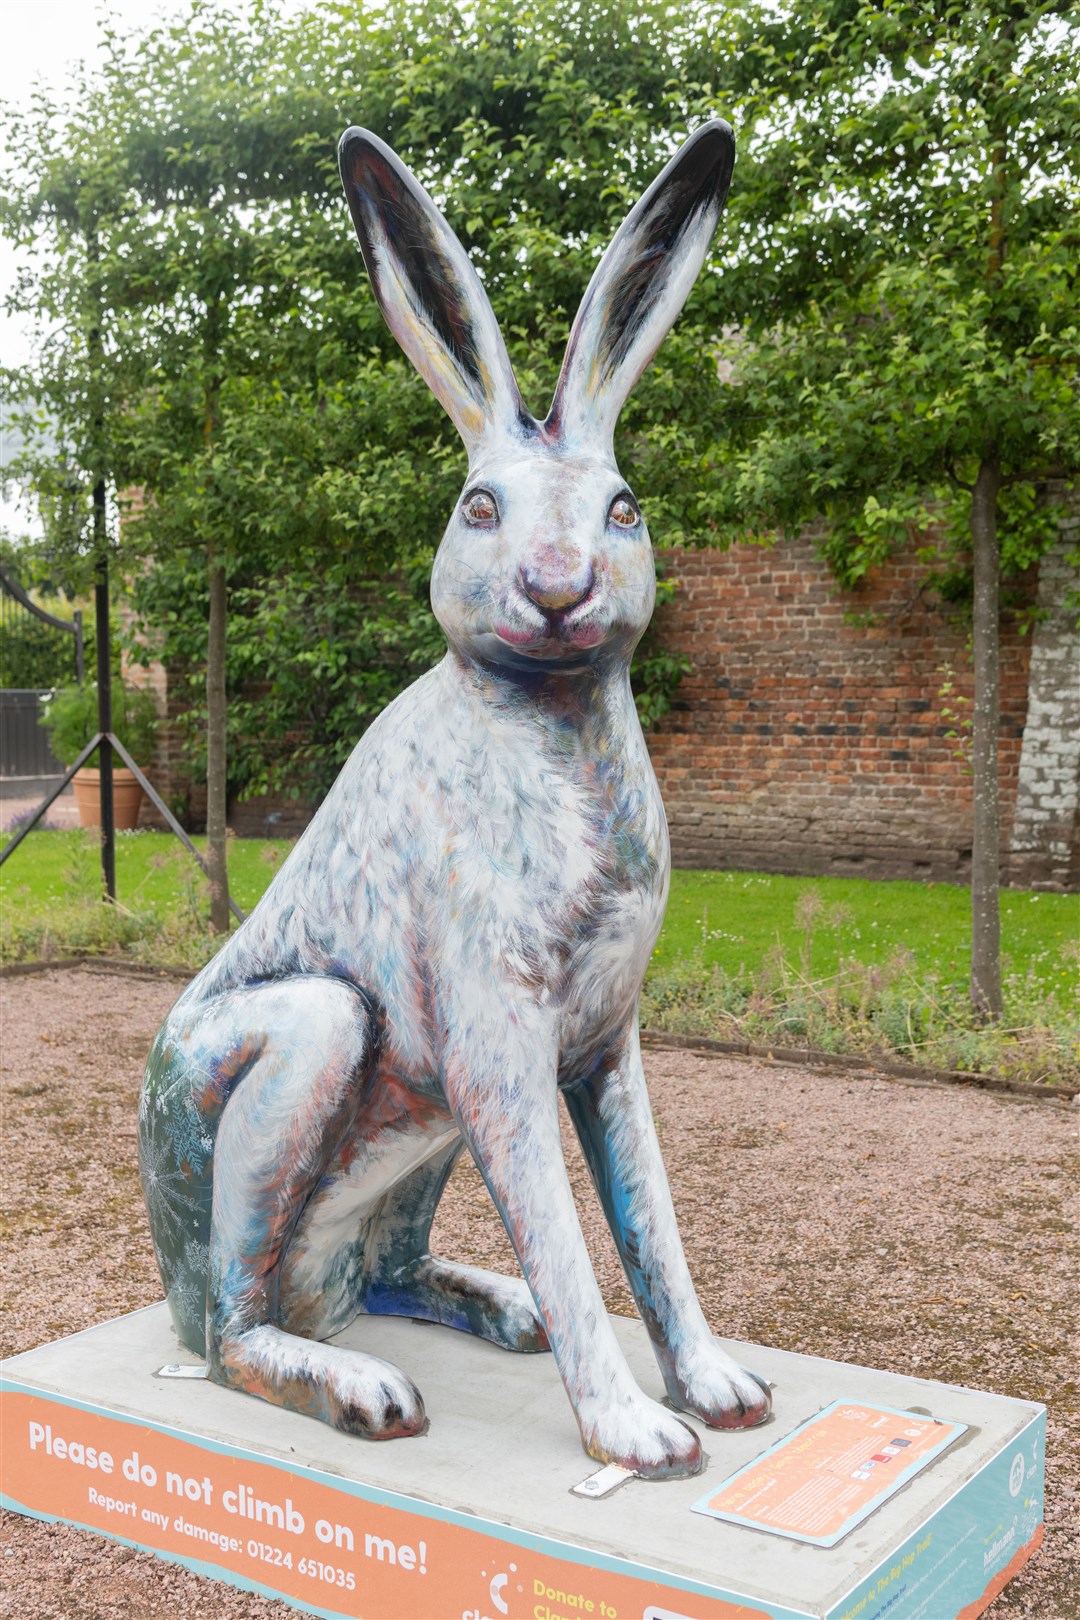 Hare today, Gone tomorrow designed by Mel Shand, can be found at Gordon Castle's Walled Garden in Fochabers. Picture: Beth Taylor